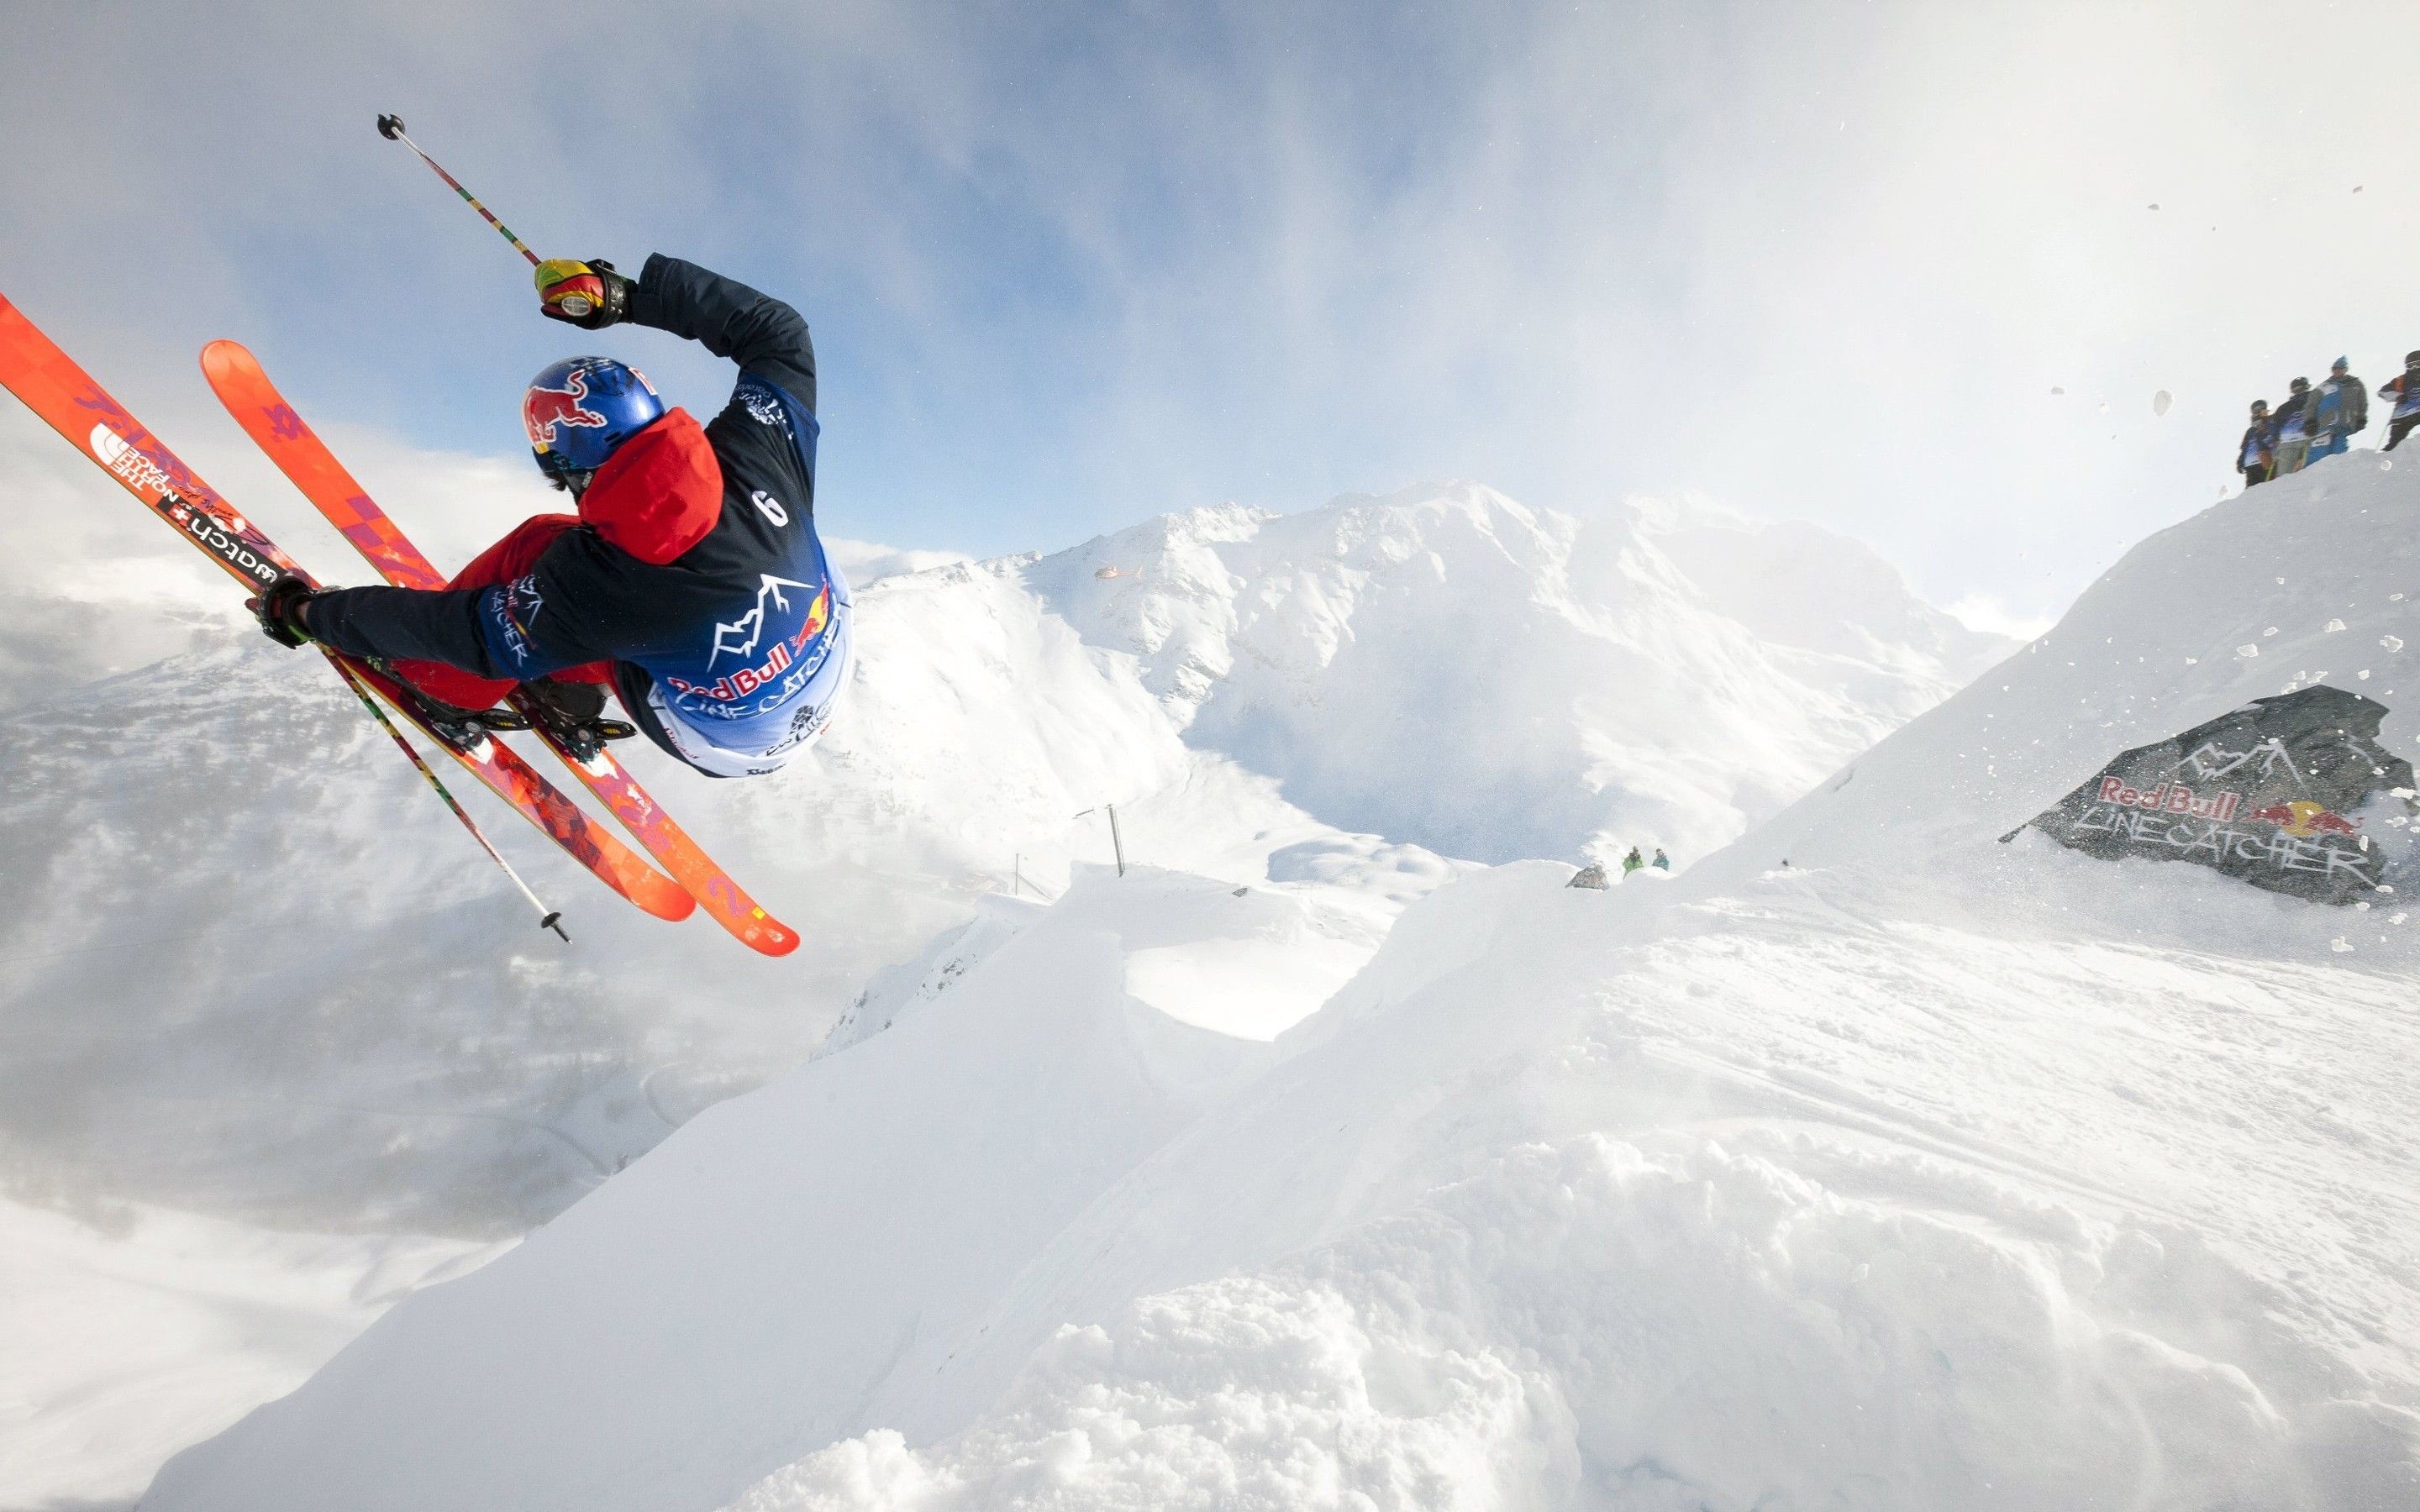 Skiing: Extreme sports, Freestyle, Downhill in a wavy course, Winter activity. 2880x1800 HD Wallpaper.